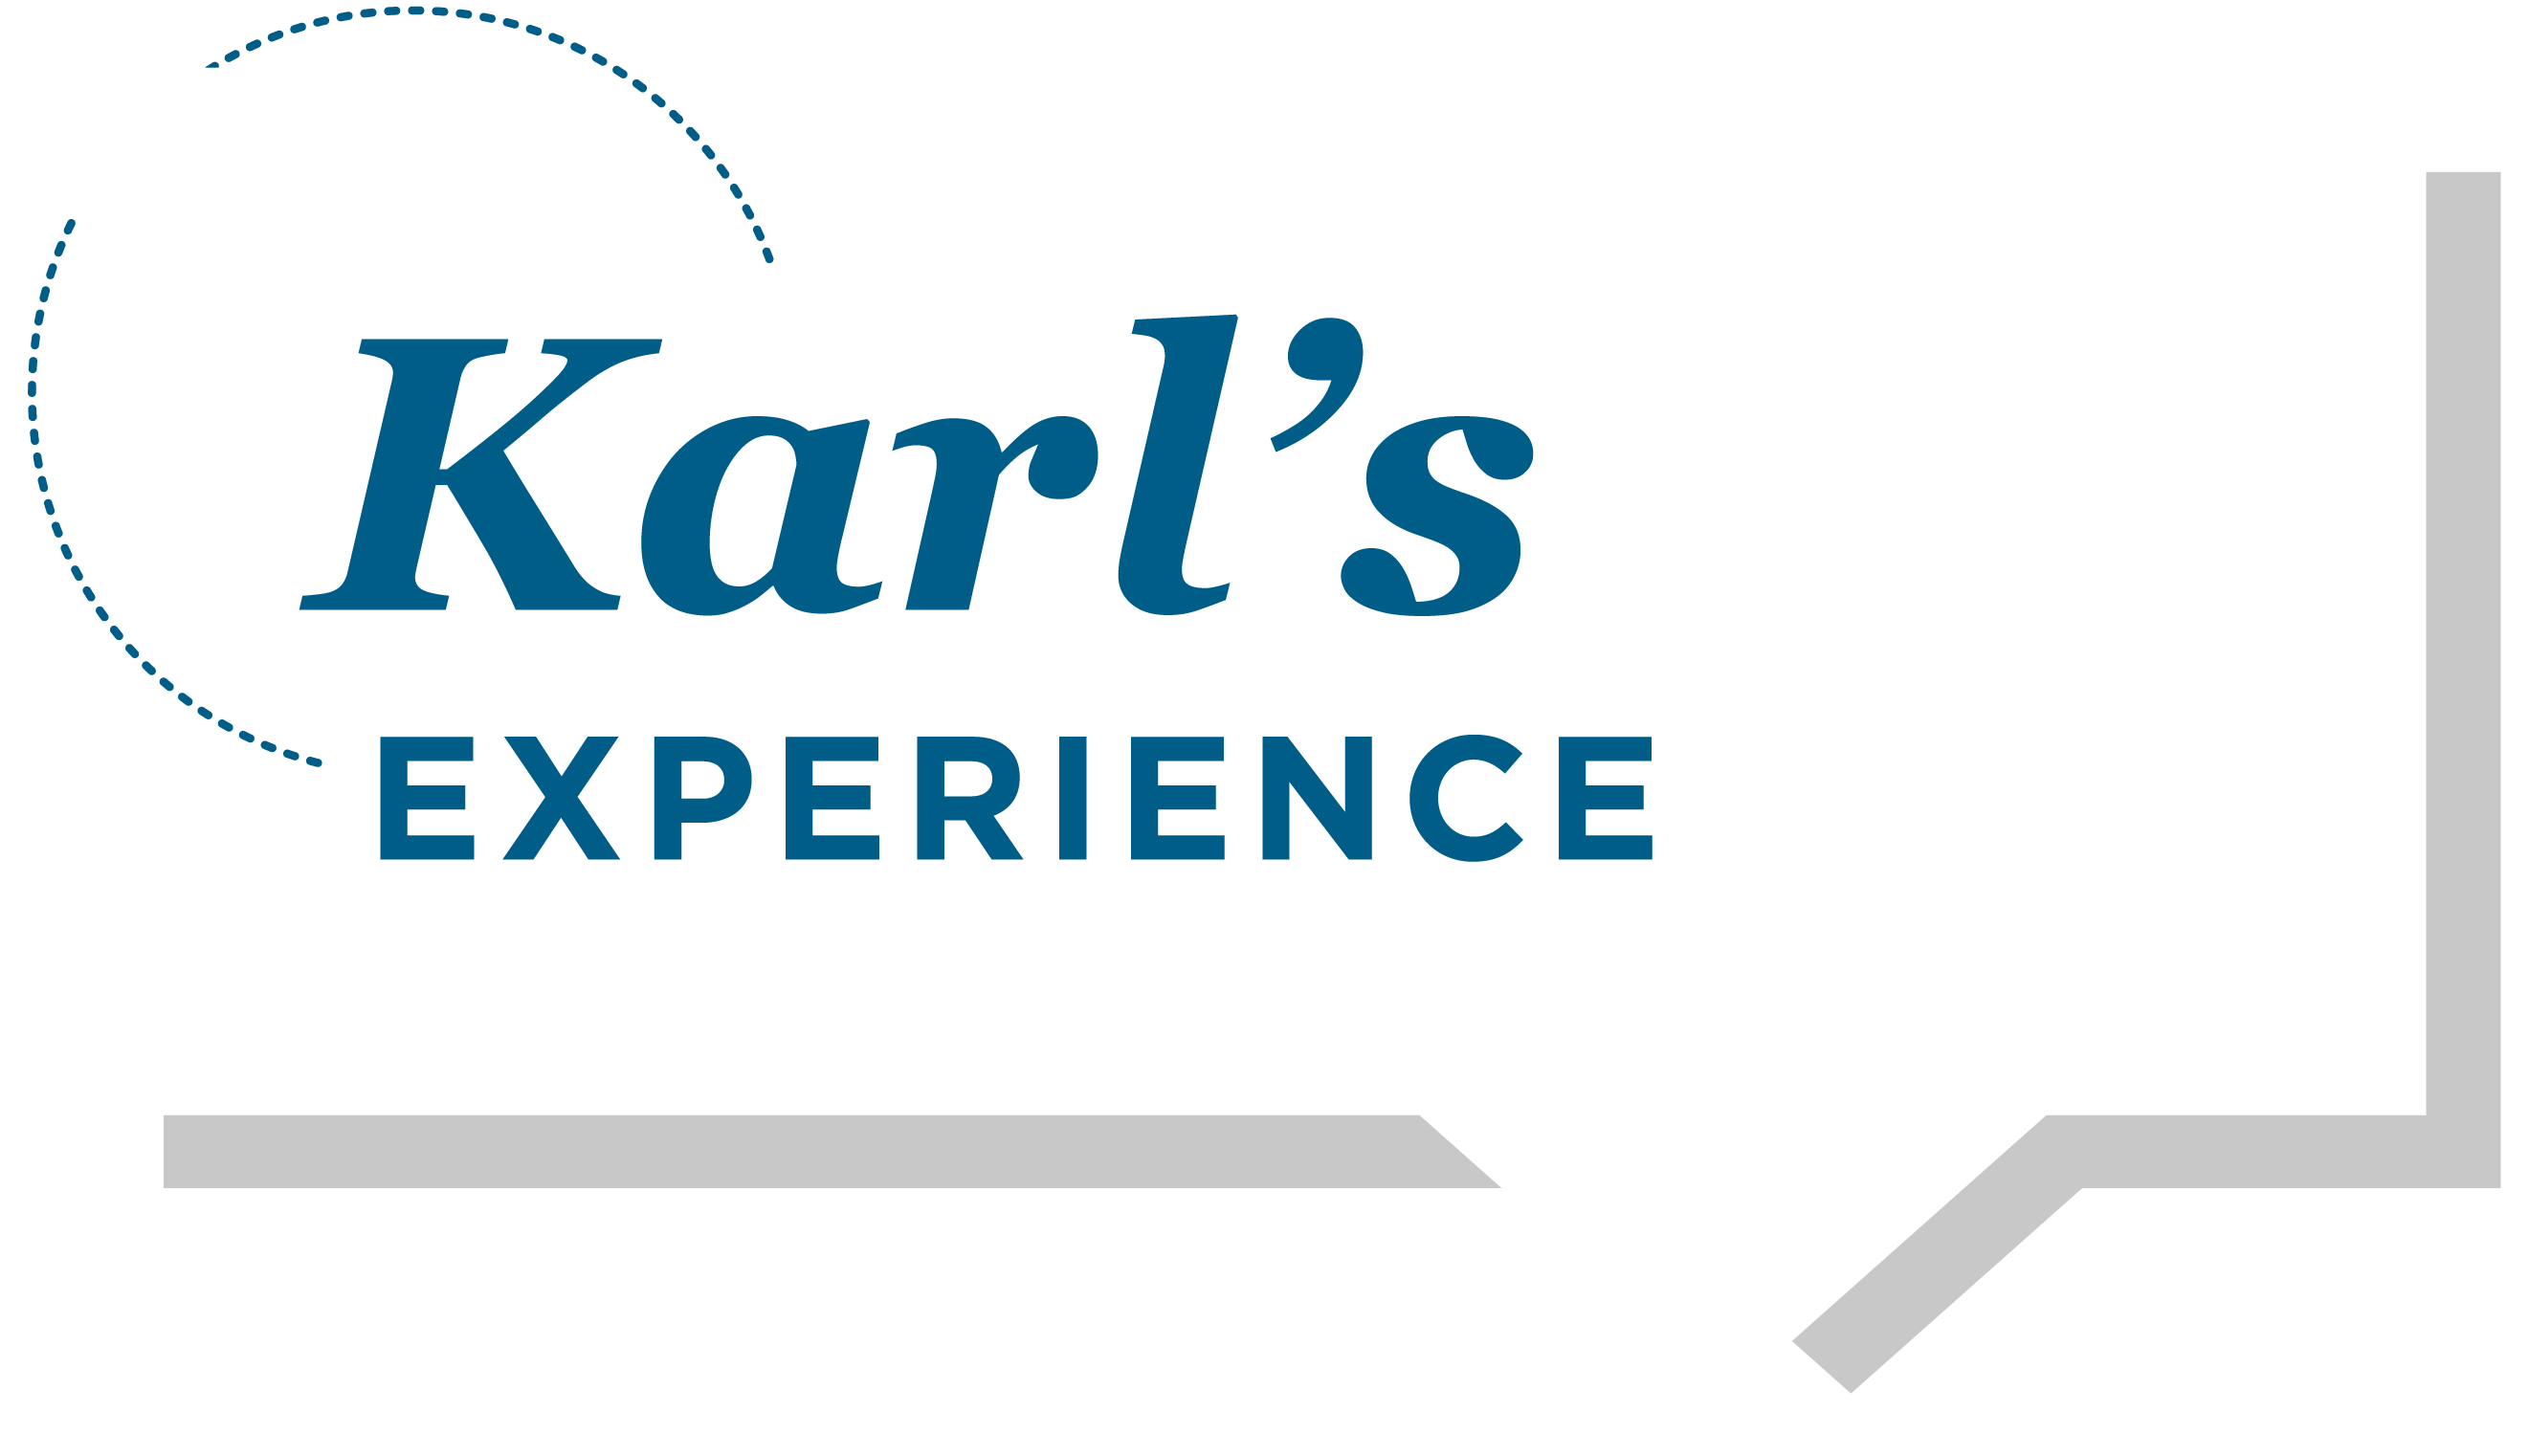 Karl's Experience